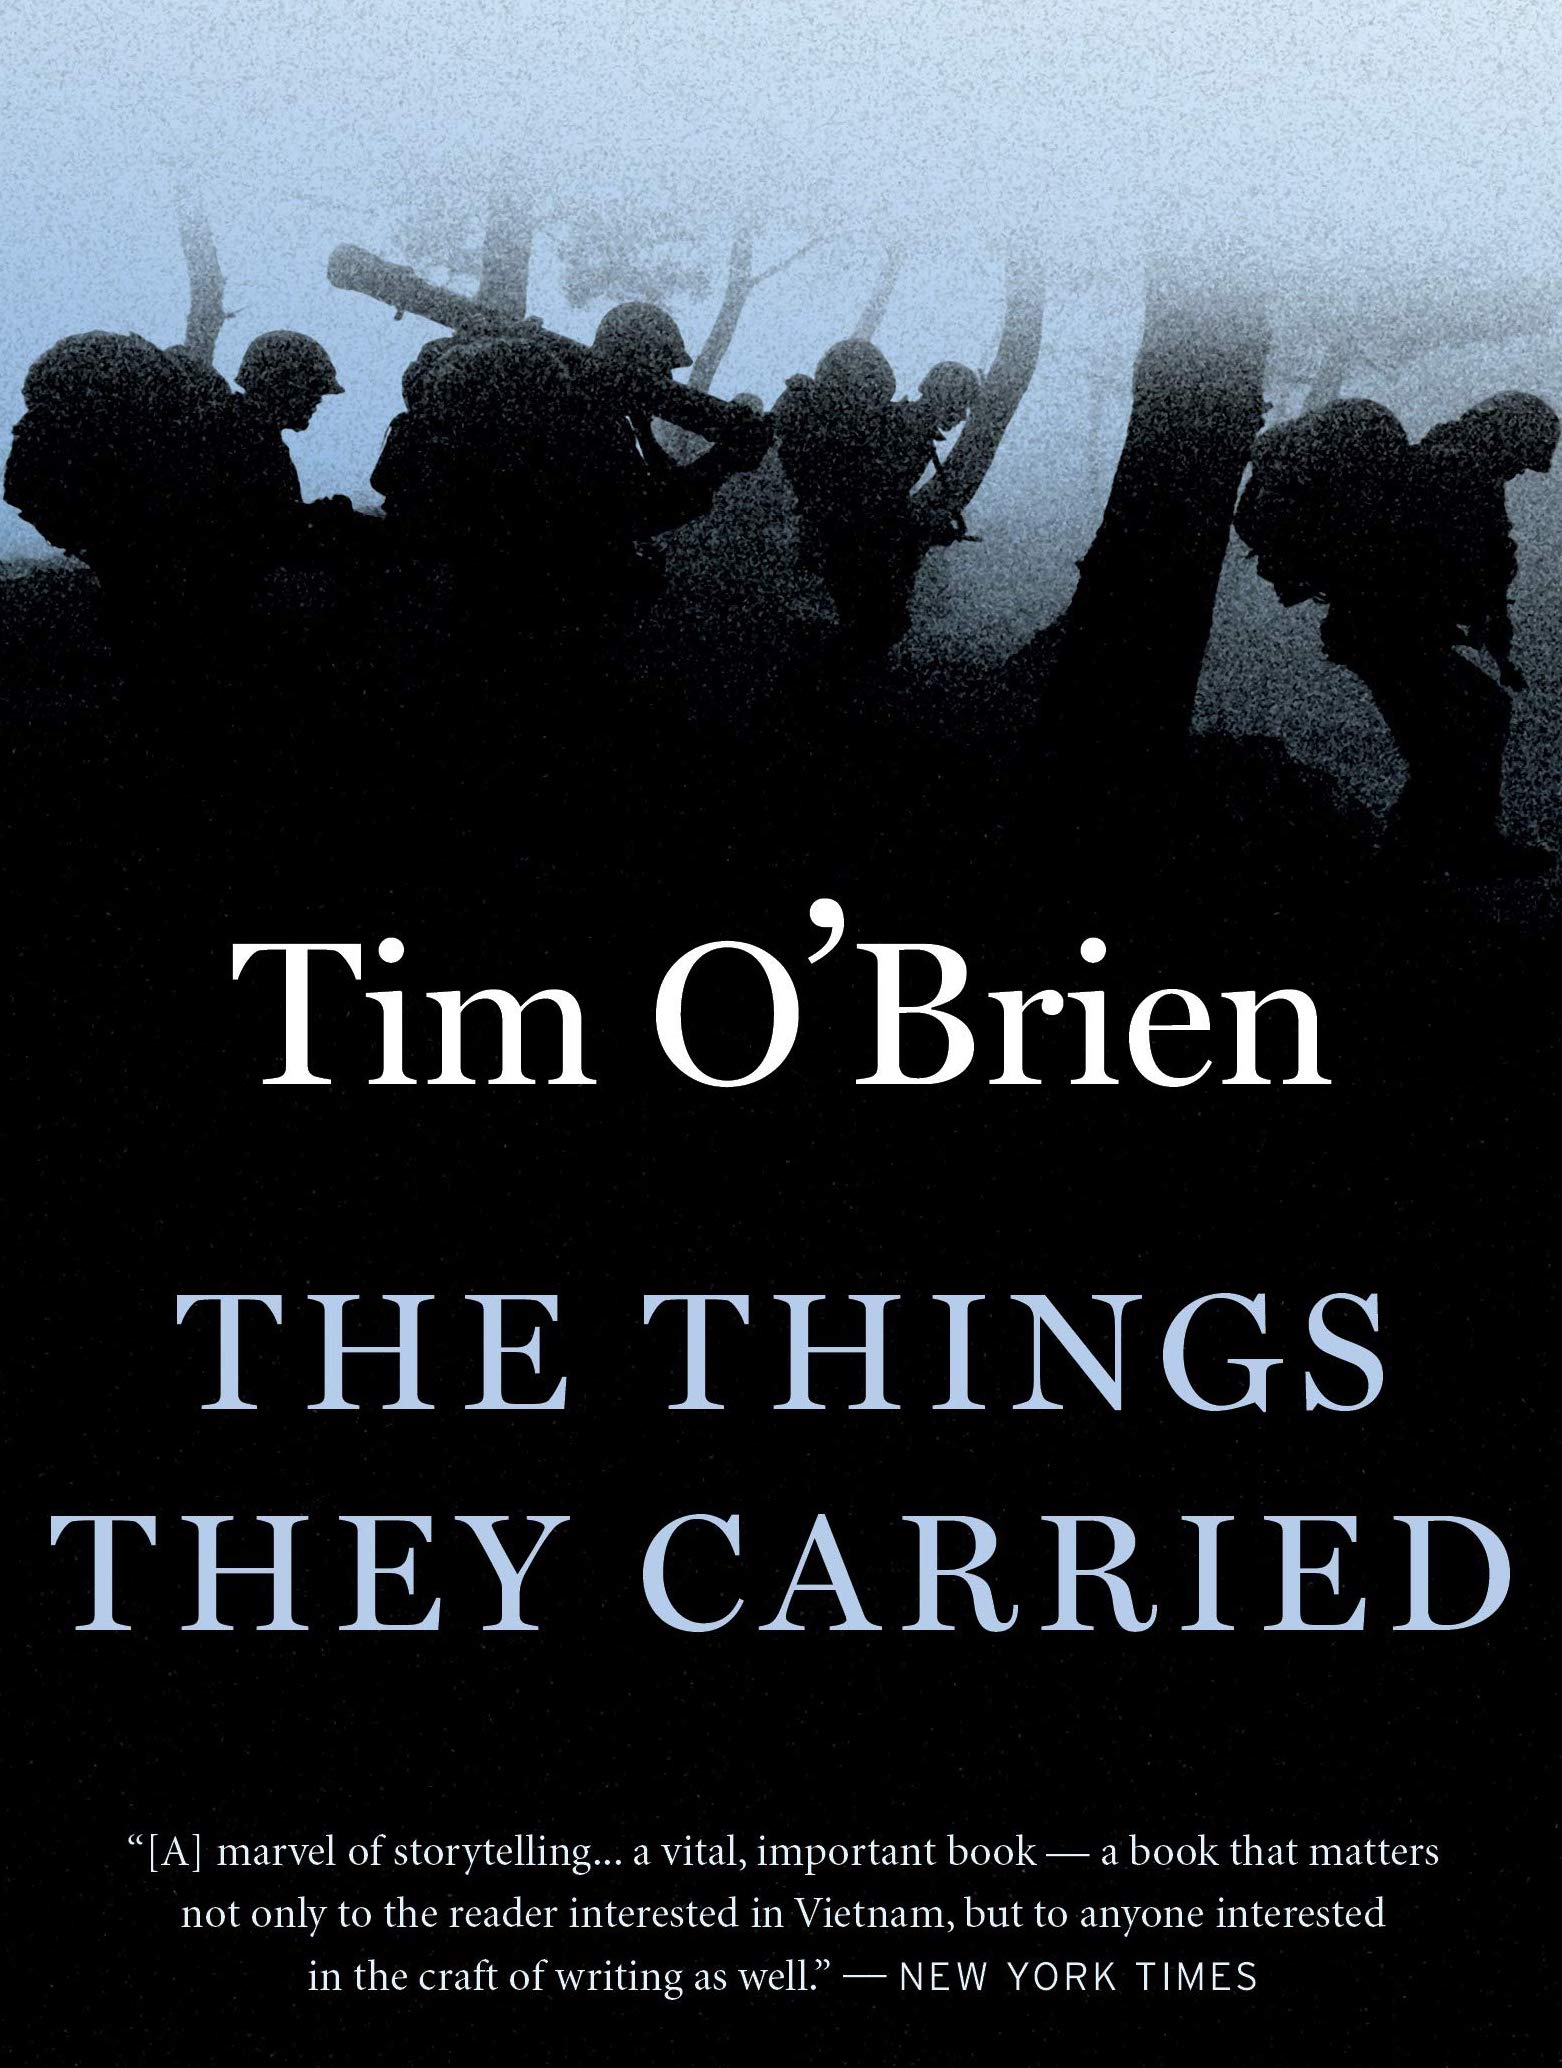 obrien-the-things-they-carried-contemporary-literature-social-studies